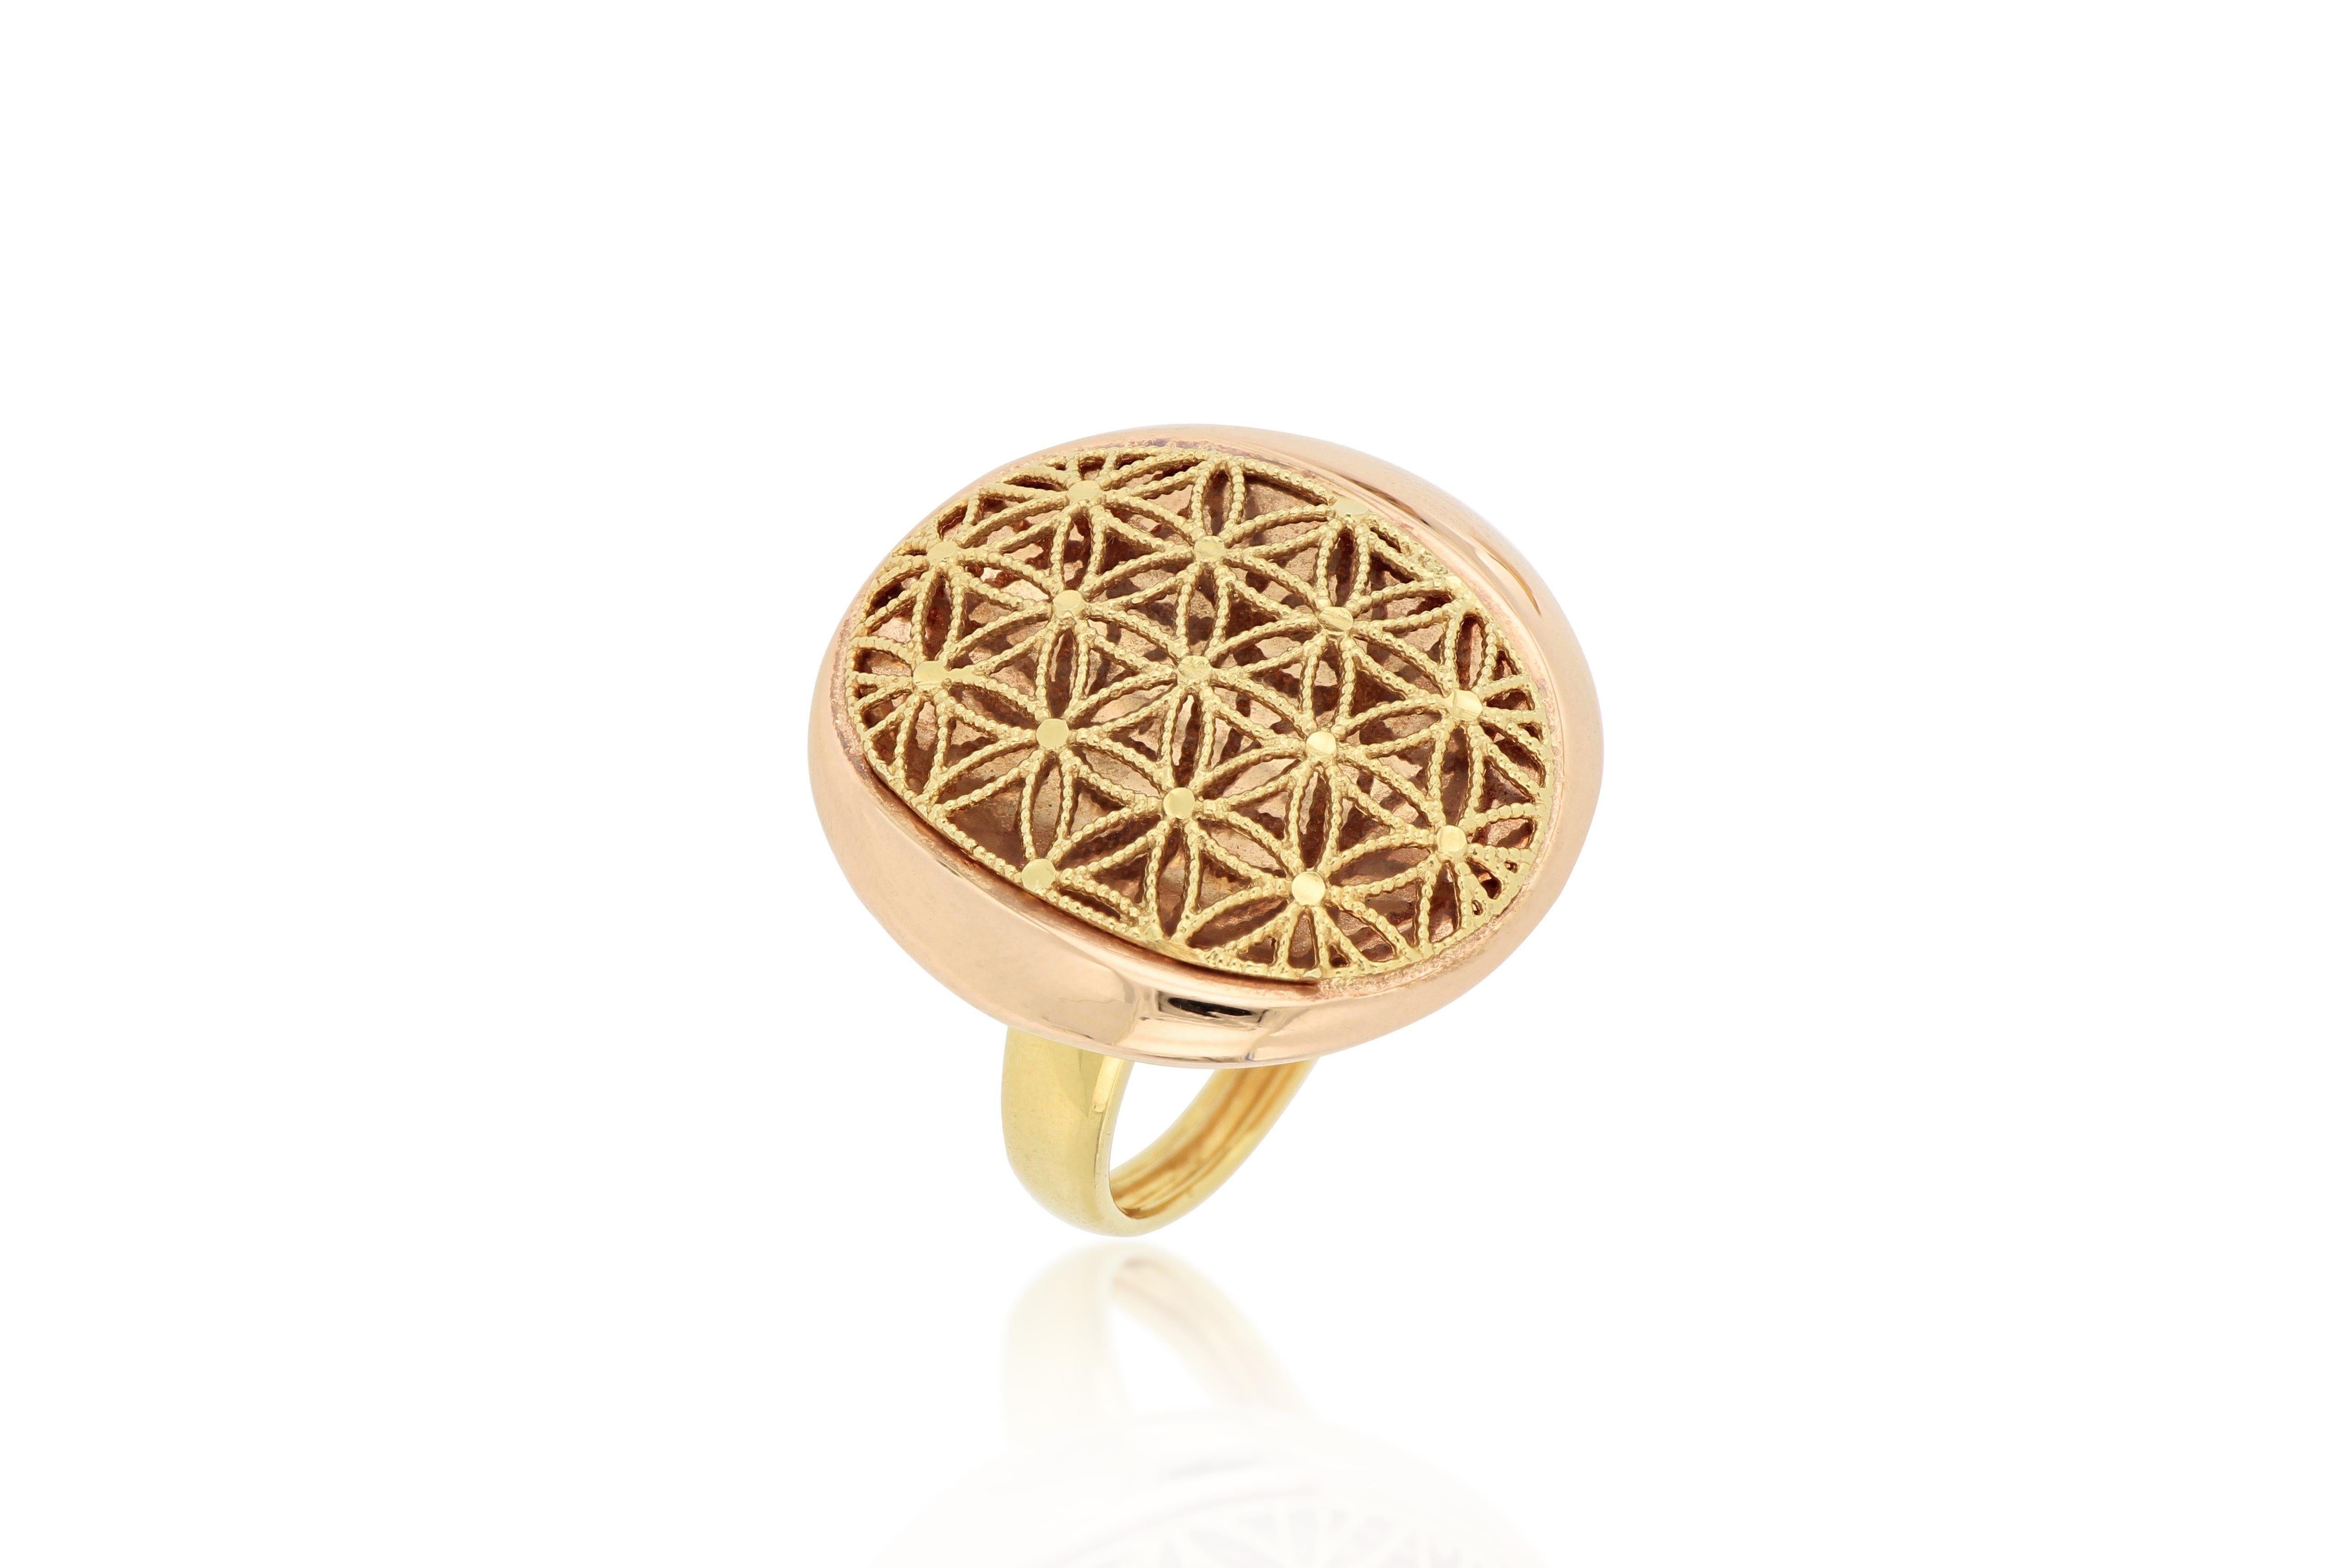 A beautiful 18 karat yellow and rose gold cocktail ring, designed and made in Italy, featuring geometric pattern with textured body .
O’Che 1867 is renowned for its high jewellery collections with fabulous designs. Our designs reflect the cultural